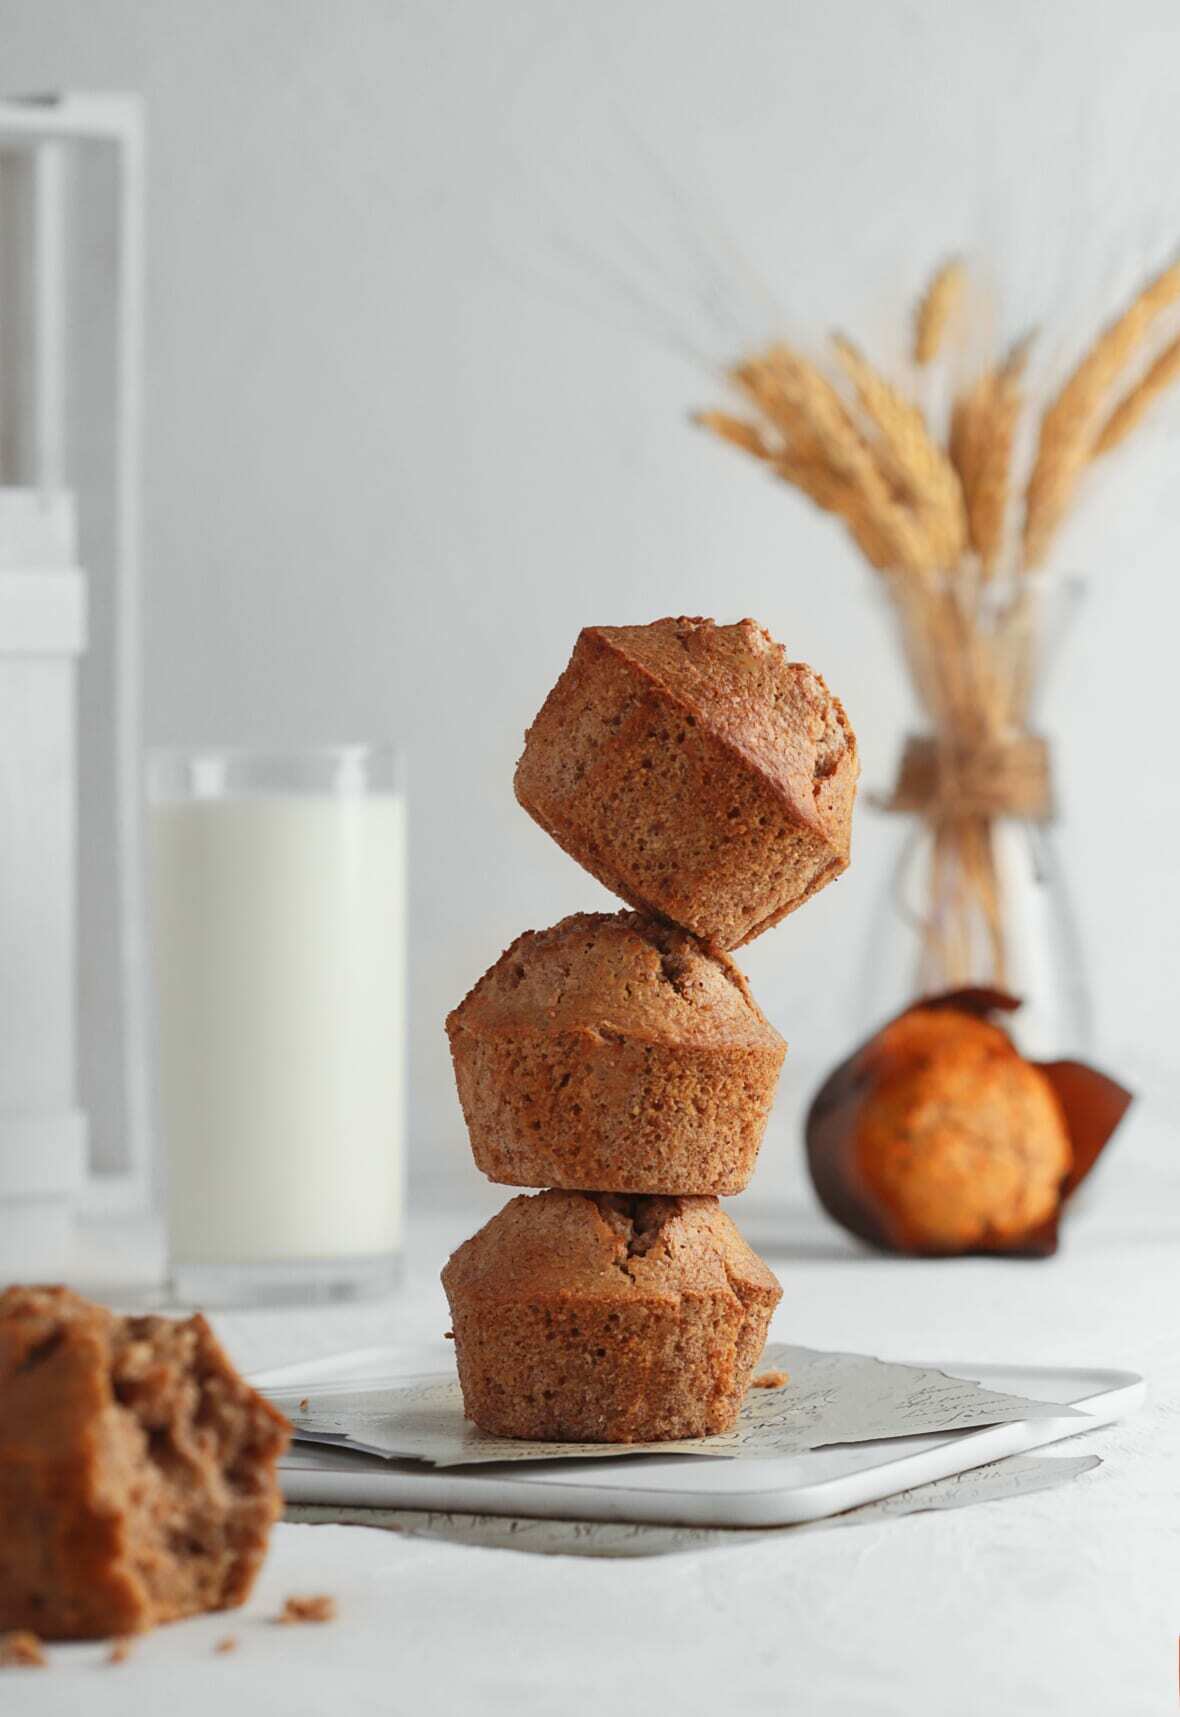 How to Make Muffins Without a Muffin Pan (Plus 10 Amazing Pan-Free Muffin Recipes)